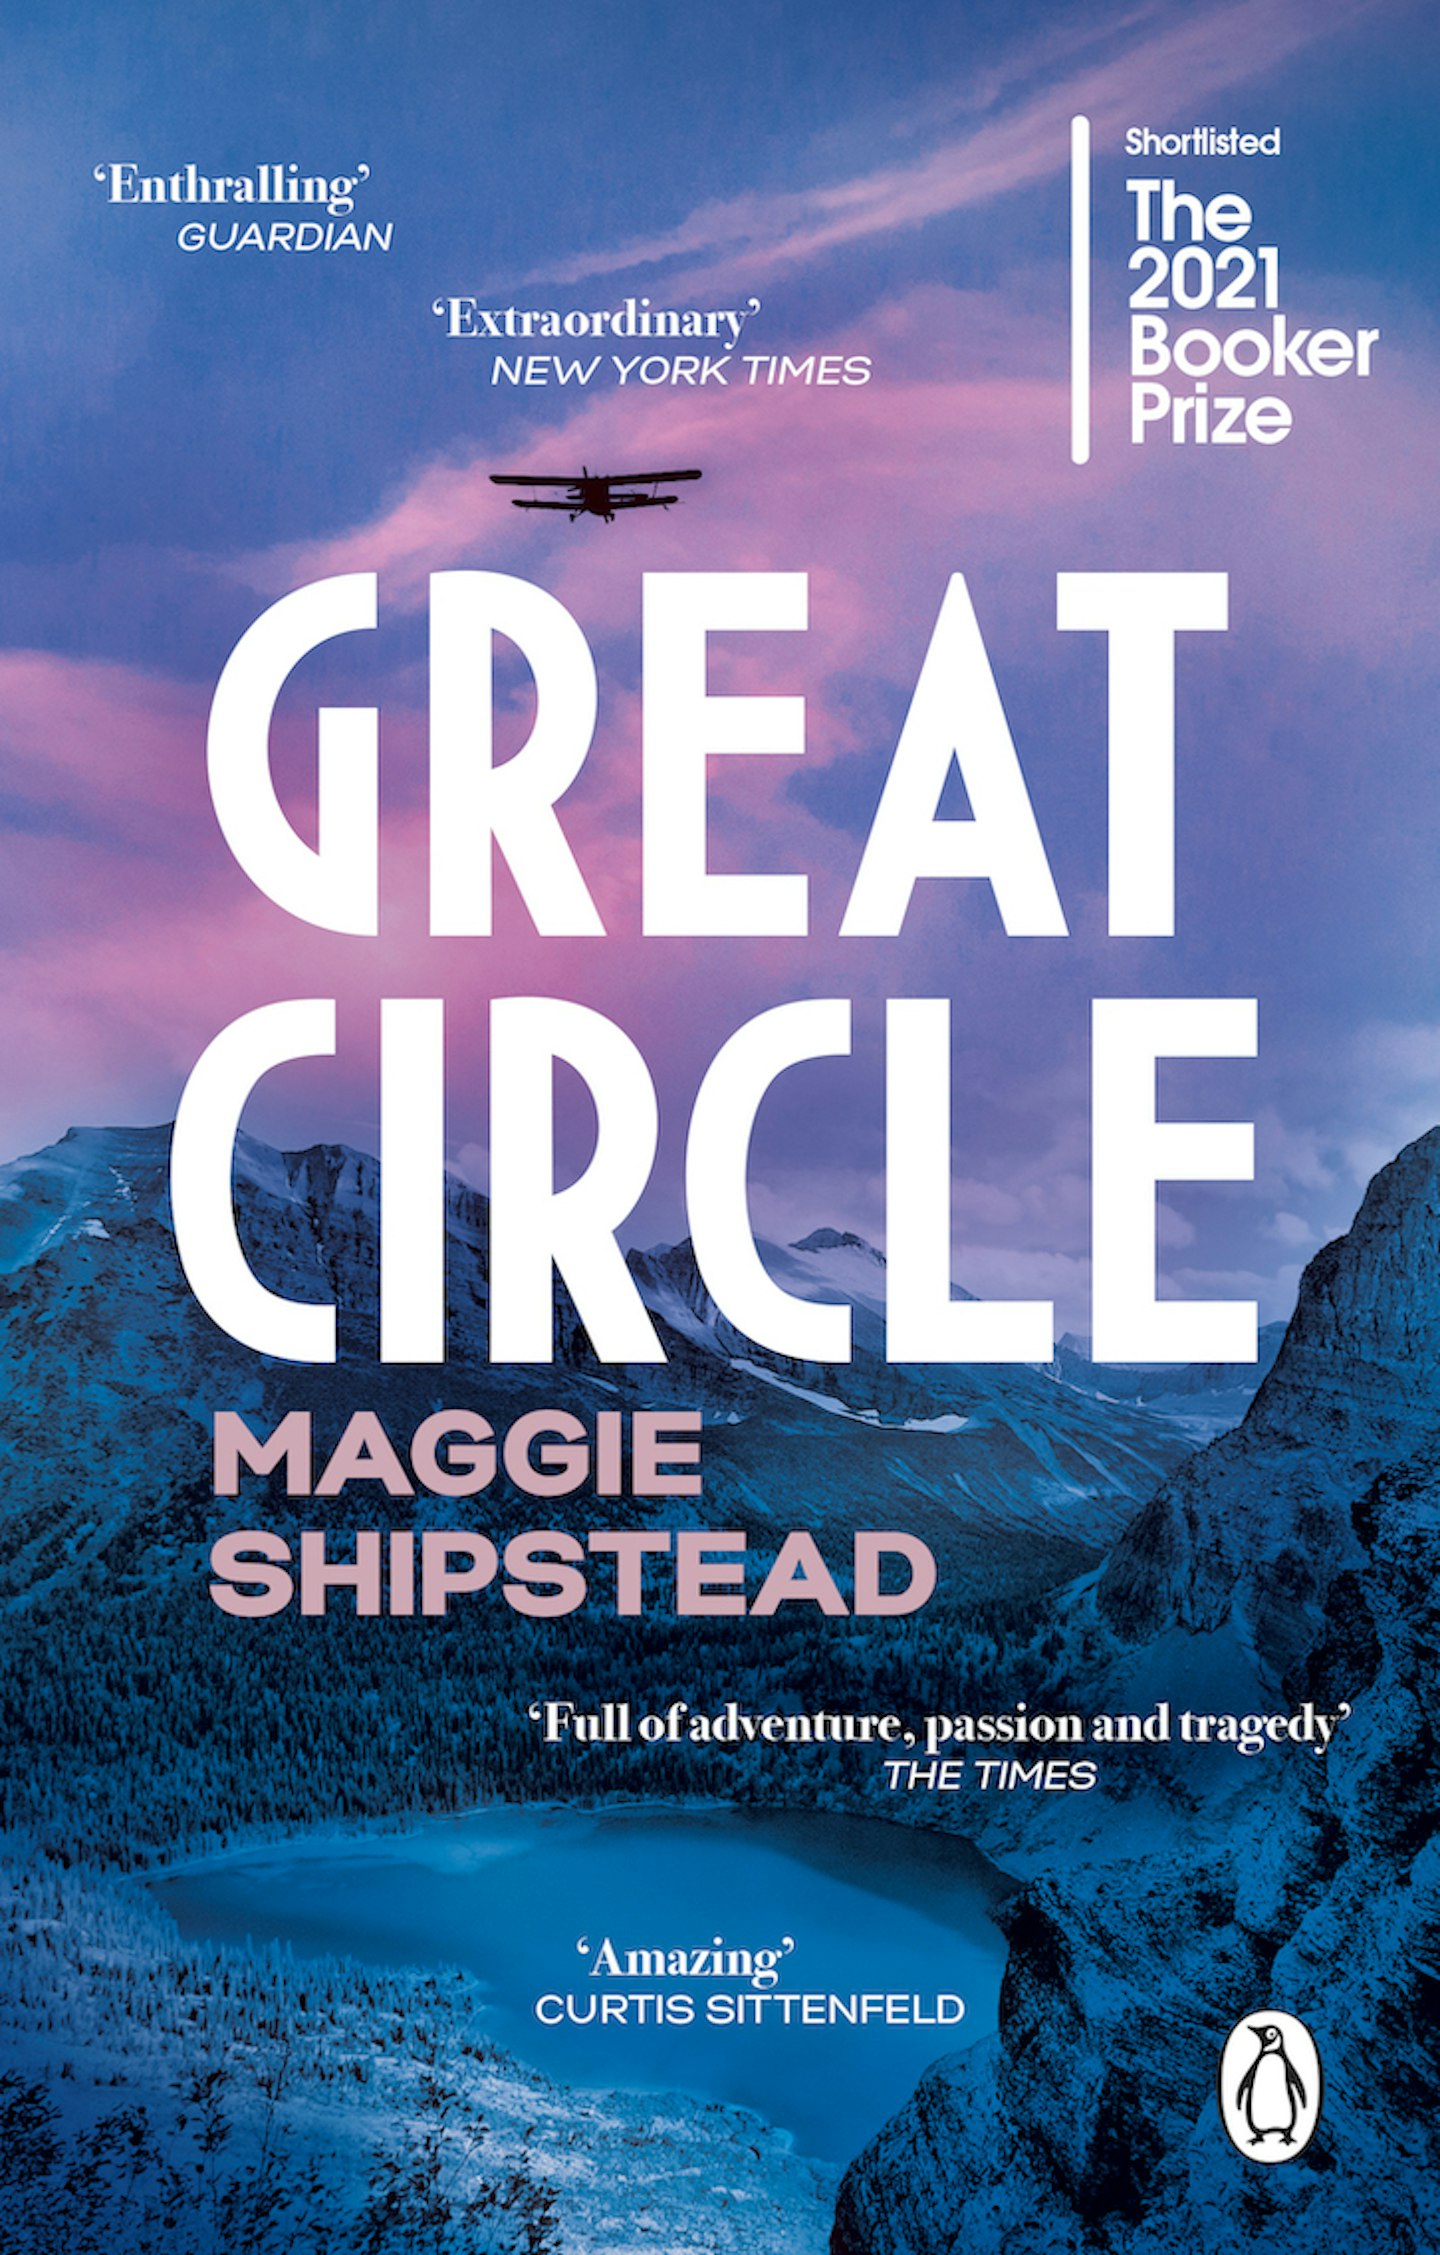 GREAT CIRCLE by Maggie Shipstead